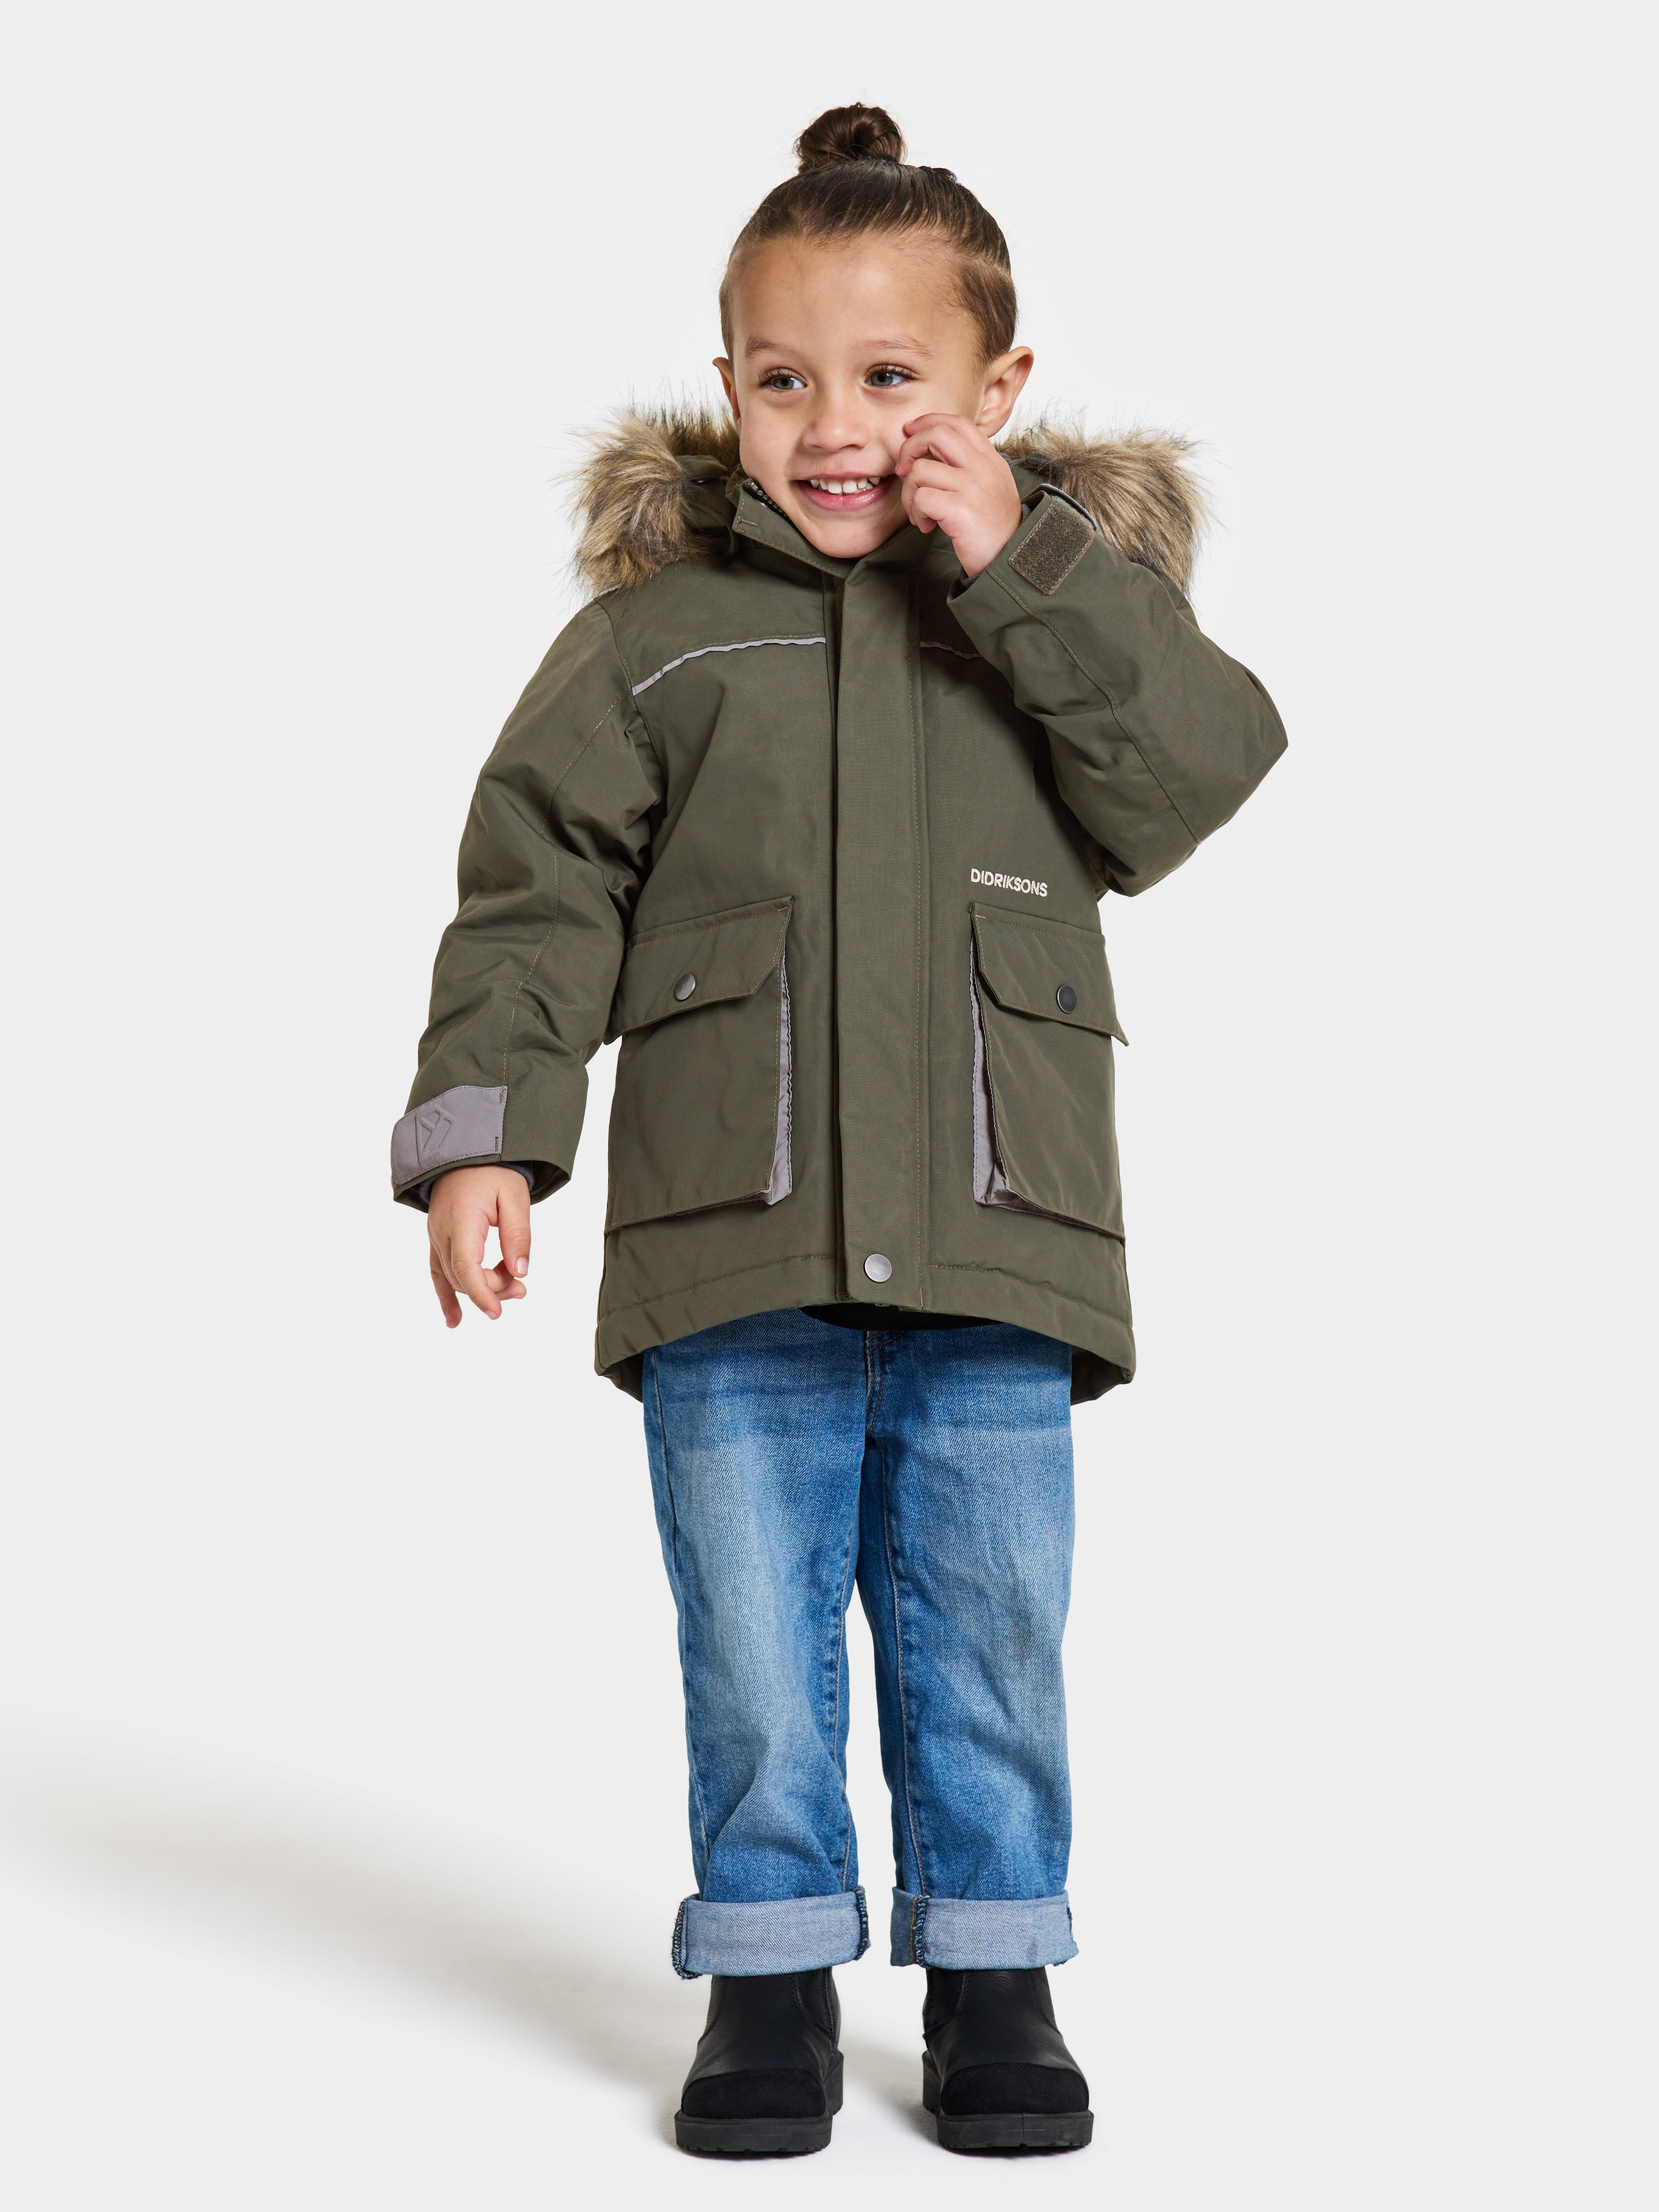 Kids' Kure Parka 6 Black | Buy Kids' Kure Parka 6 Black here | Outnorth